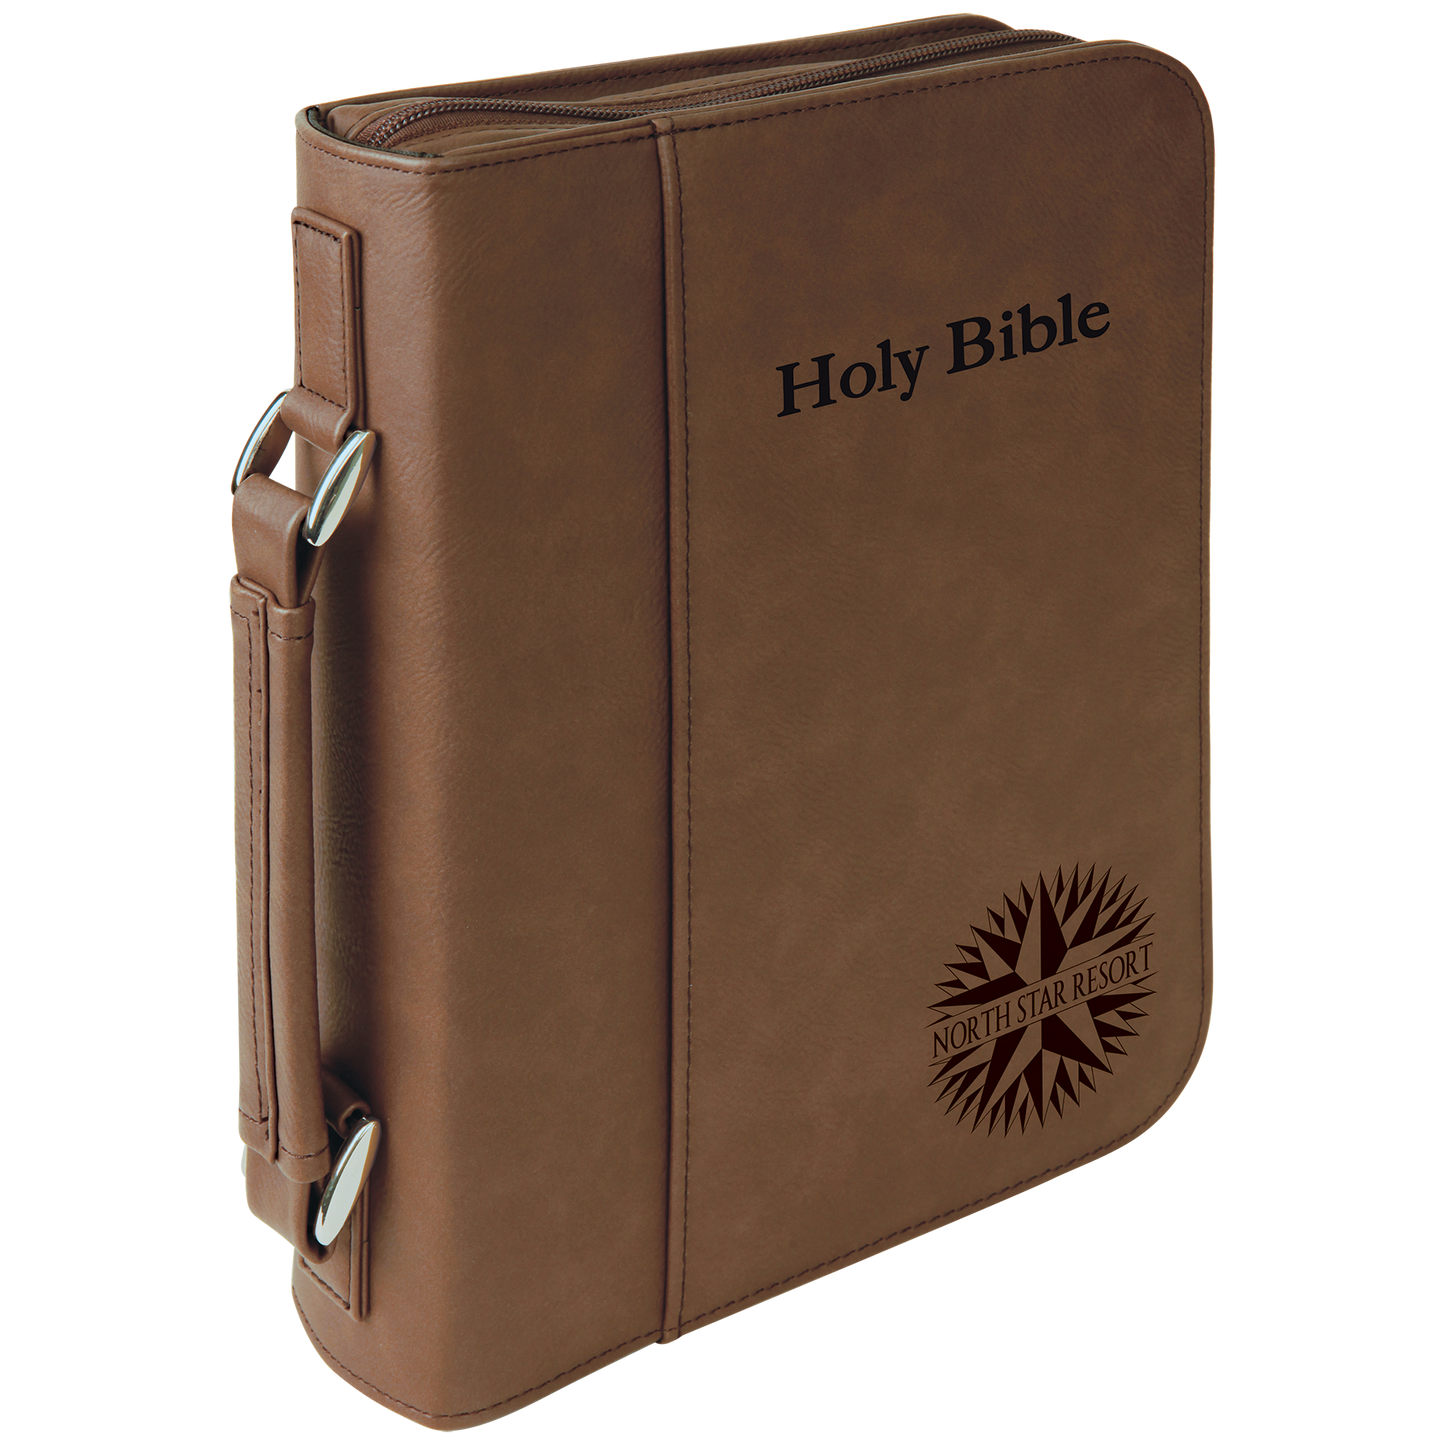 Personalized Book/Bible Cover with Handle & Zipper